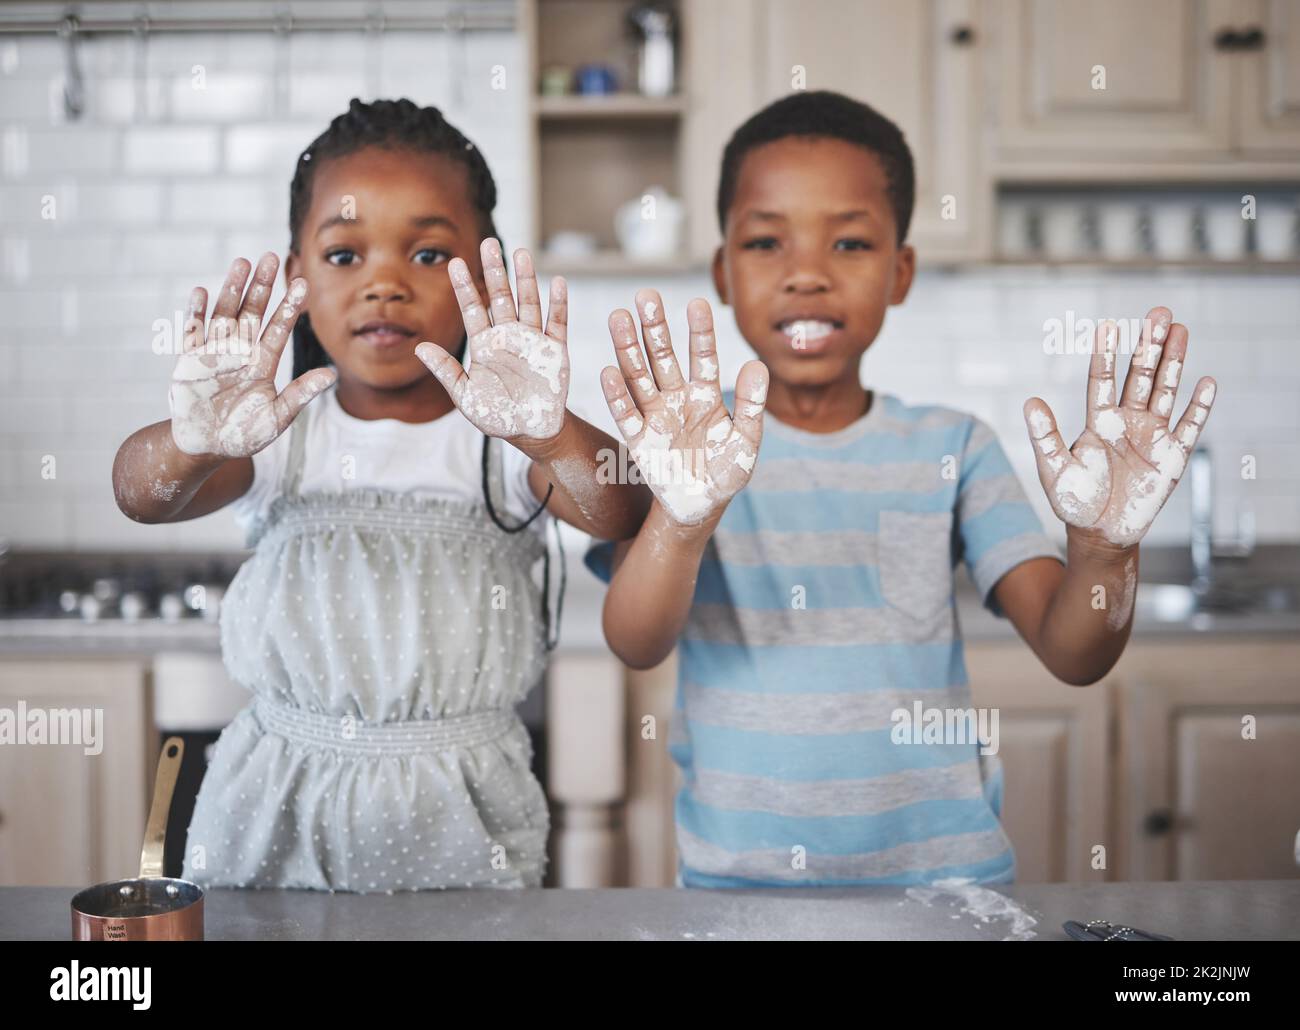 Dirty hands, pure hearts. Shot of a little girl and boy having fun while baking together at home. Stock Photo